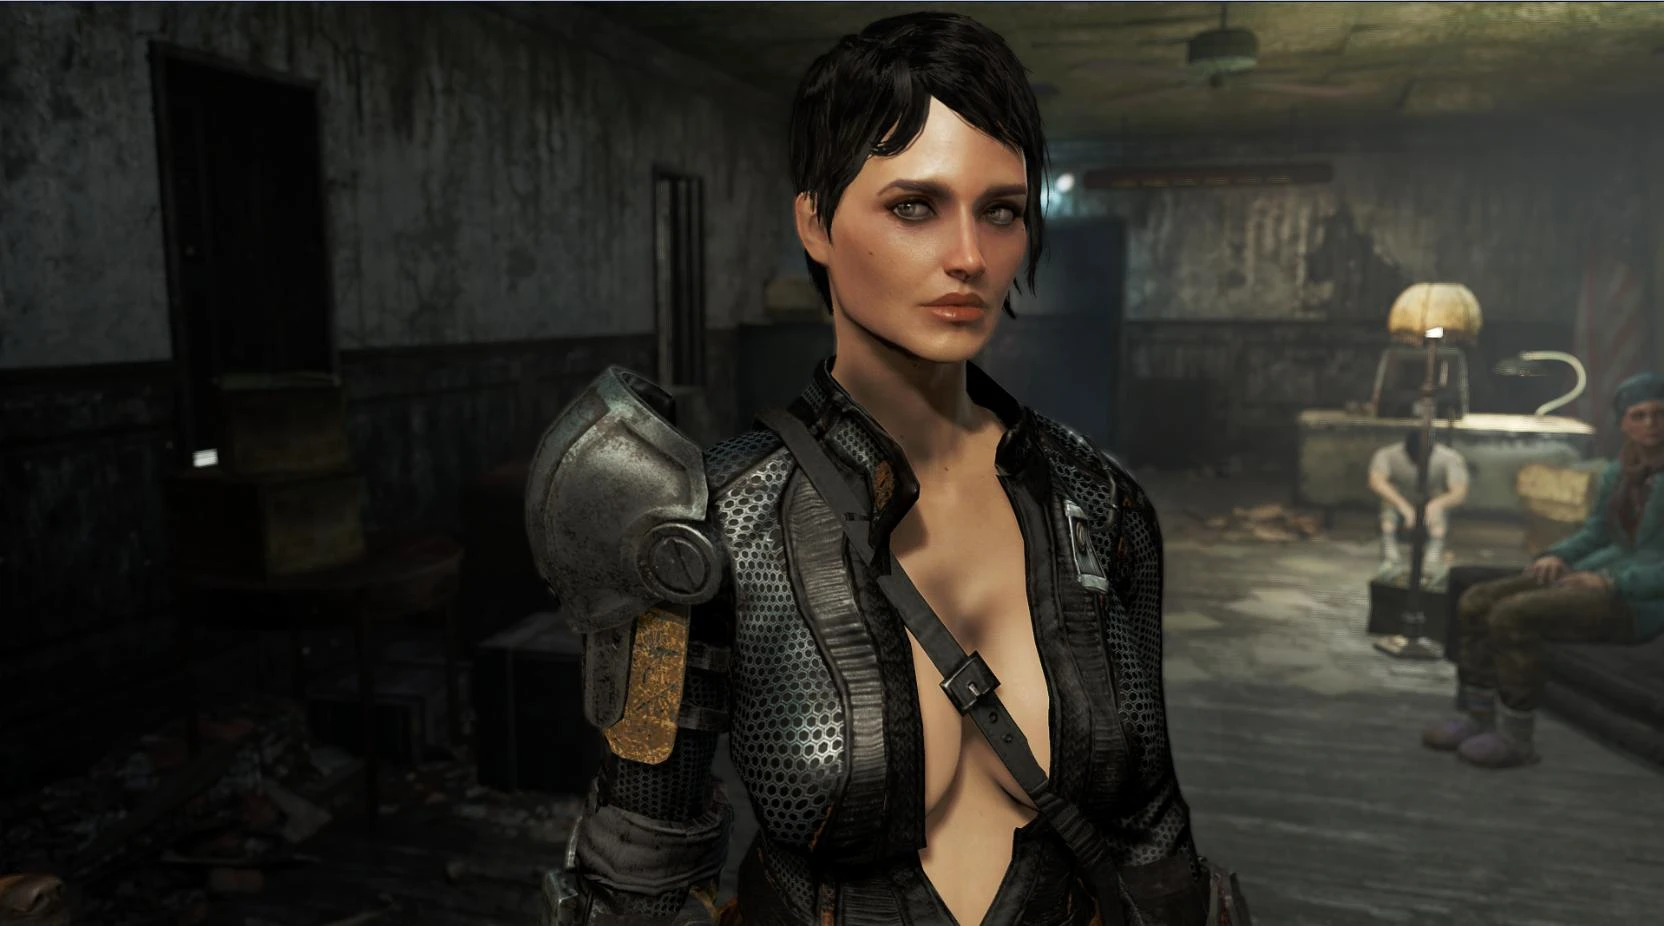 fallout 4 mods curie